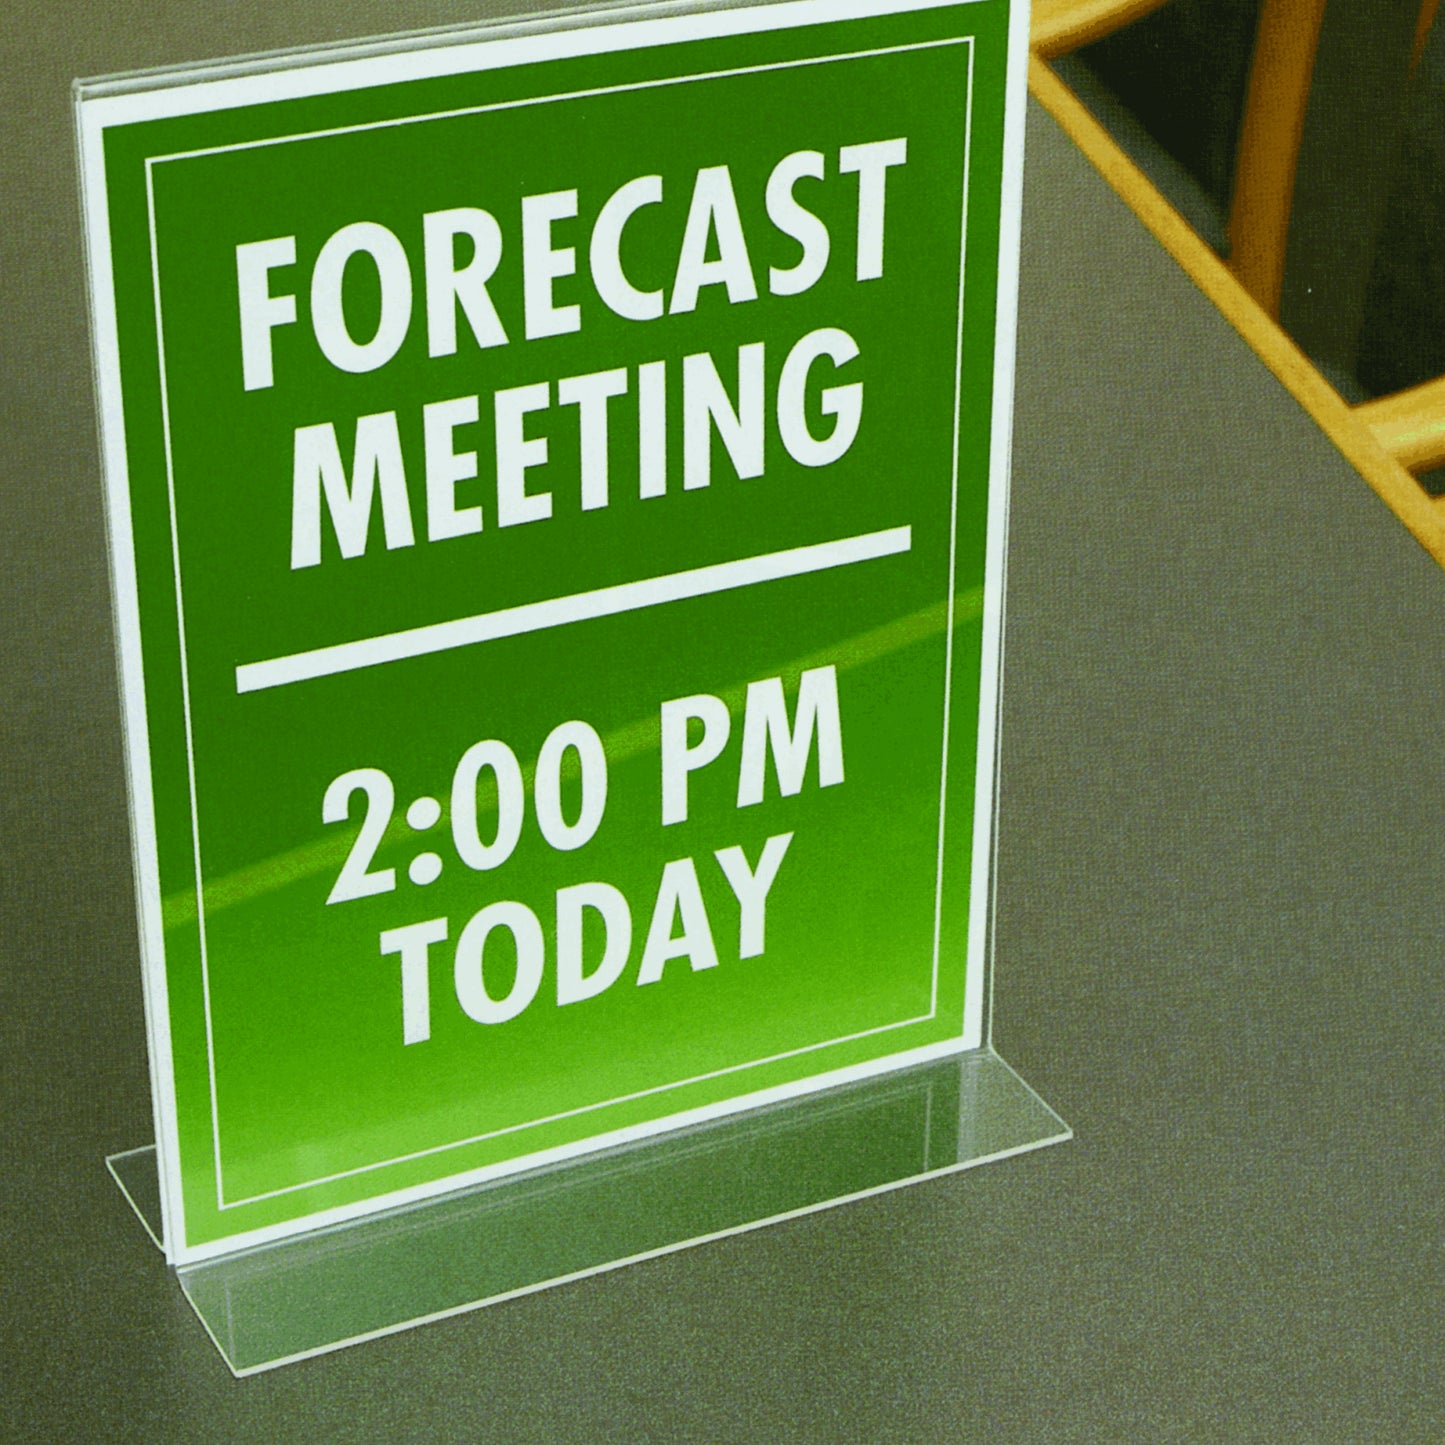 Table Top Double Sided T-Base Freestanding Sign Display Frame, 8.5" x 11"